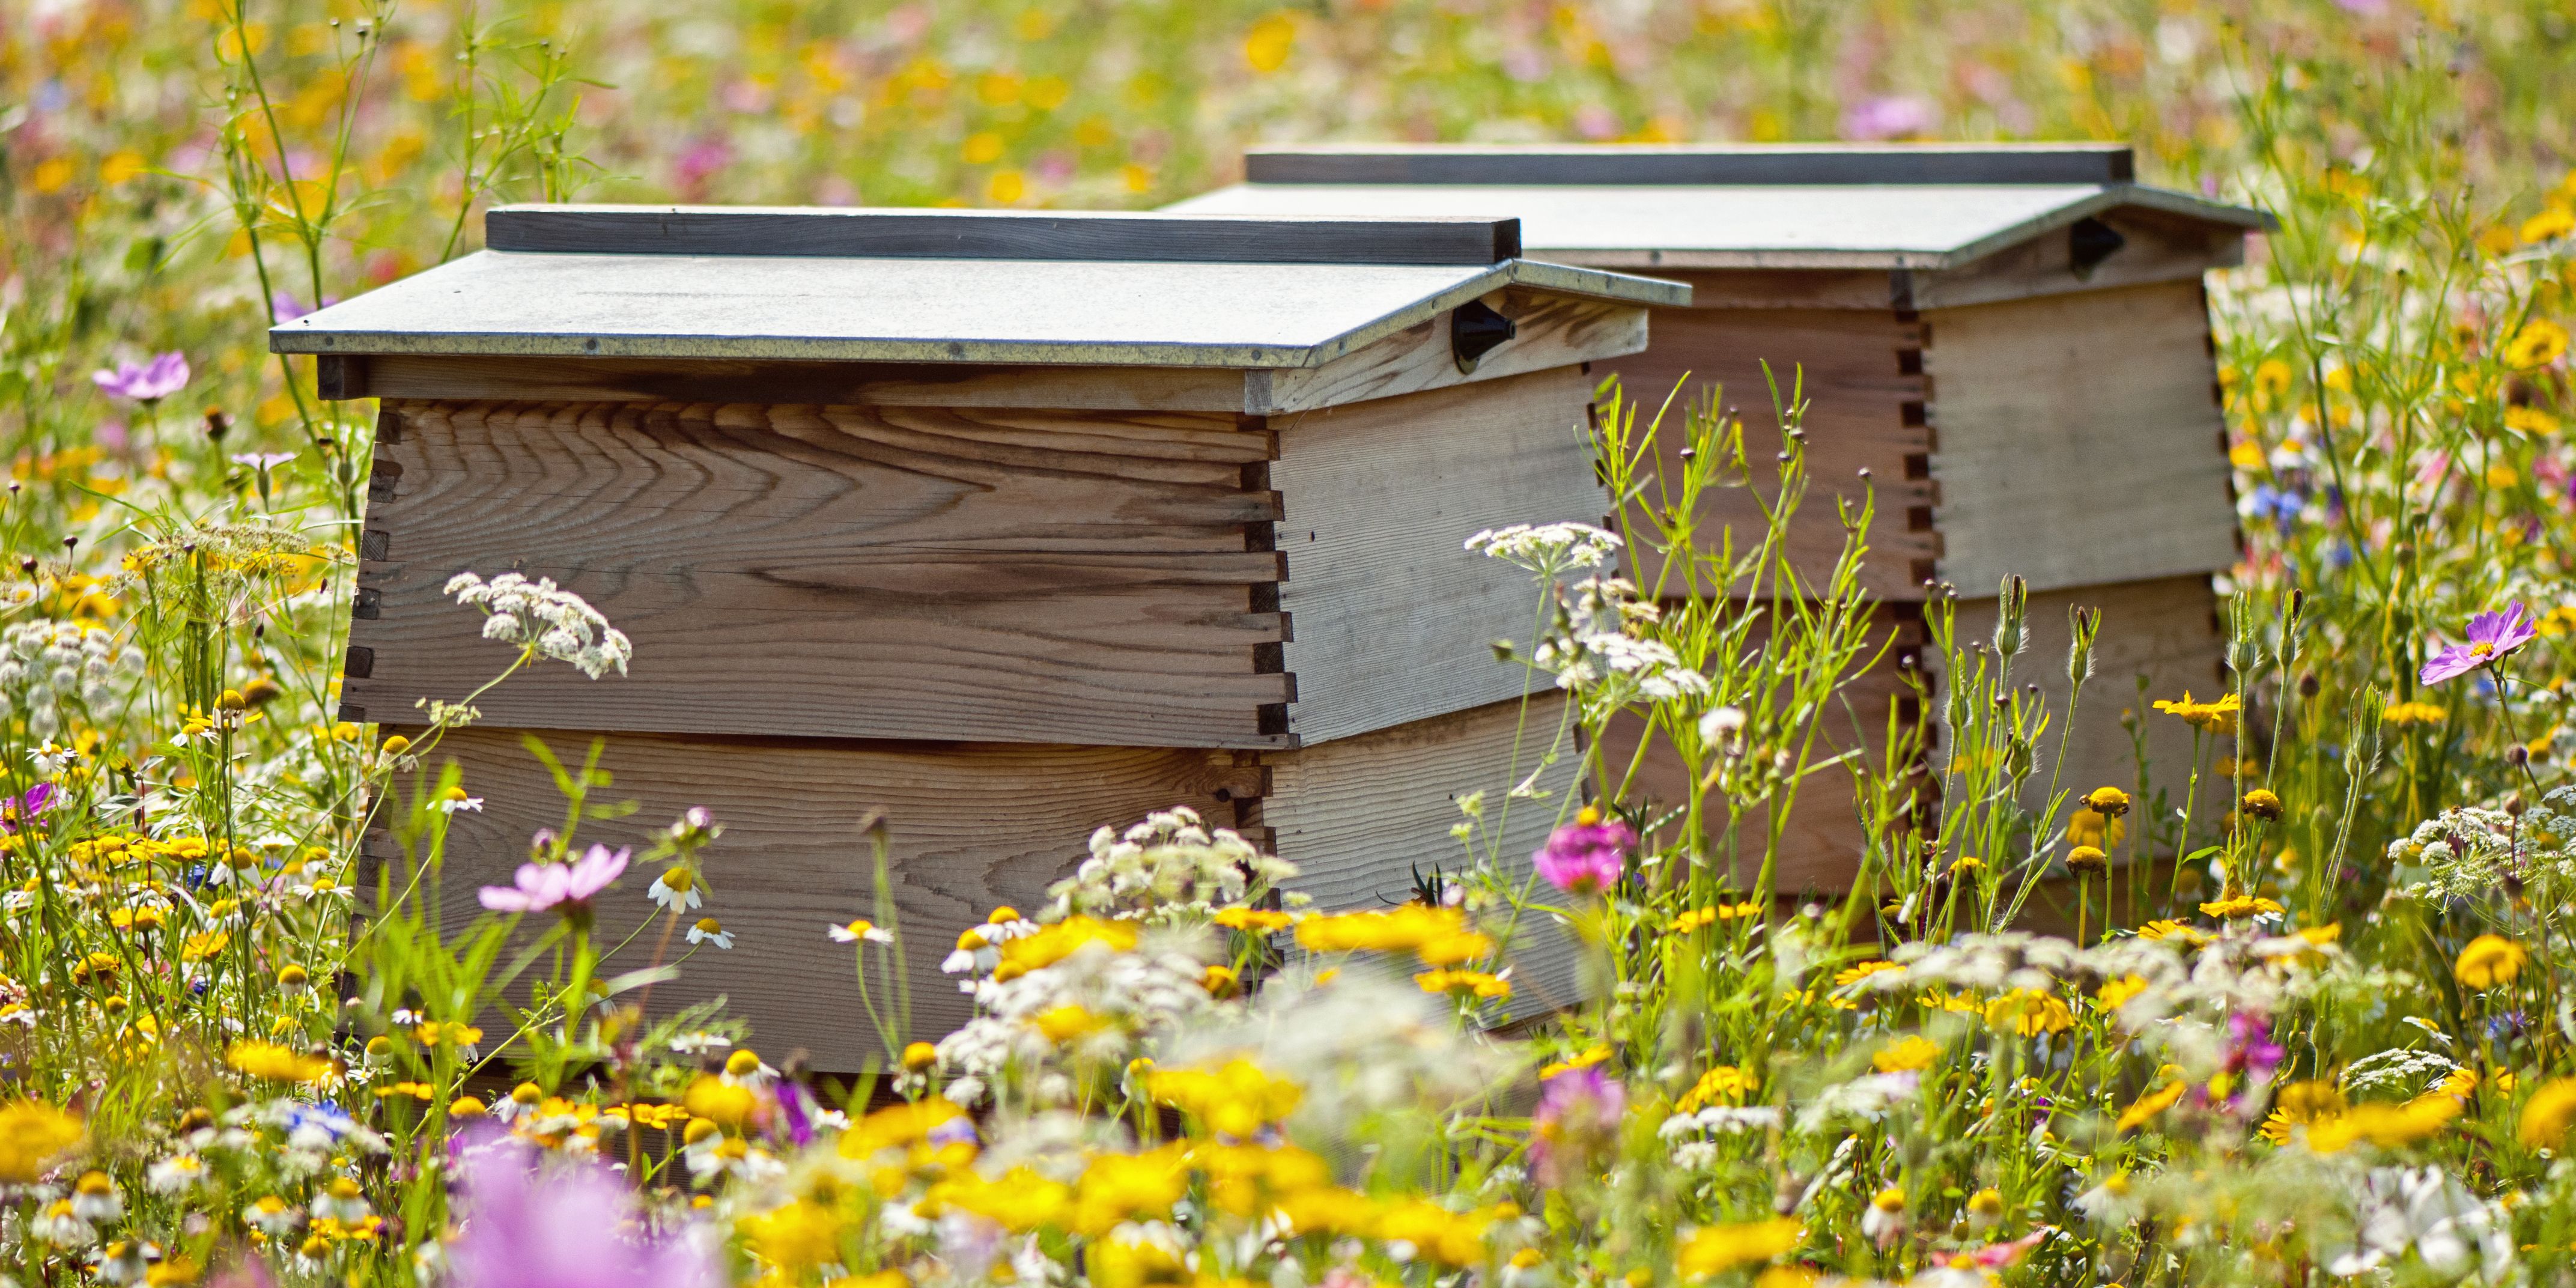 The Beginners Guide to Beekeeping Everything You Need to Know 